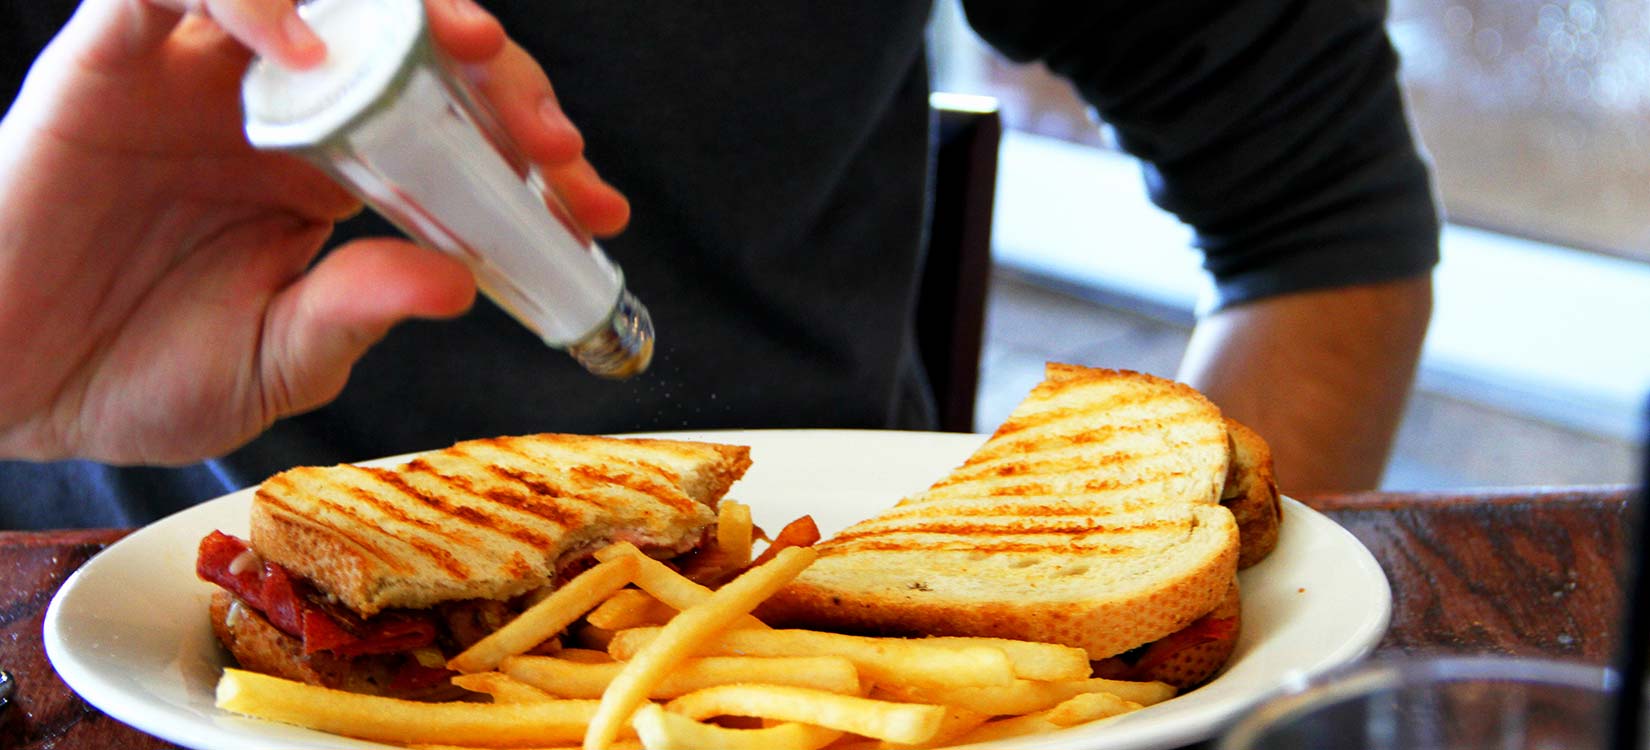 6 easy steps to reduce sodium in your diet | Ohio State Medical Center